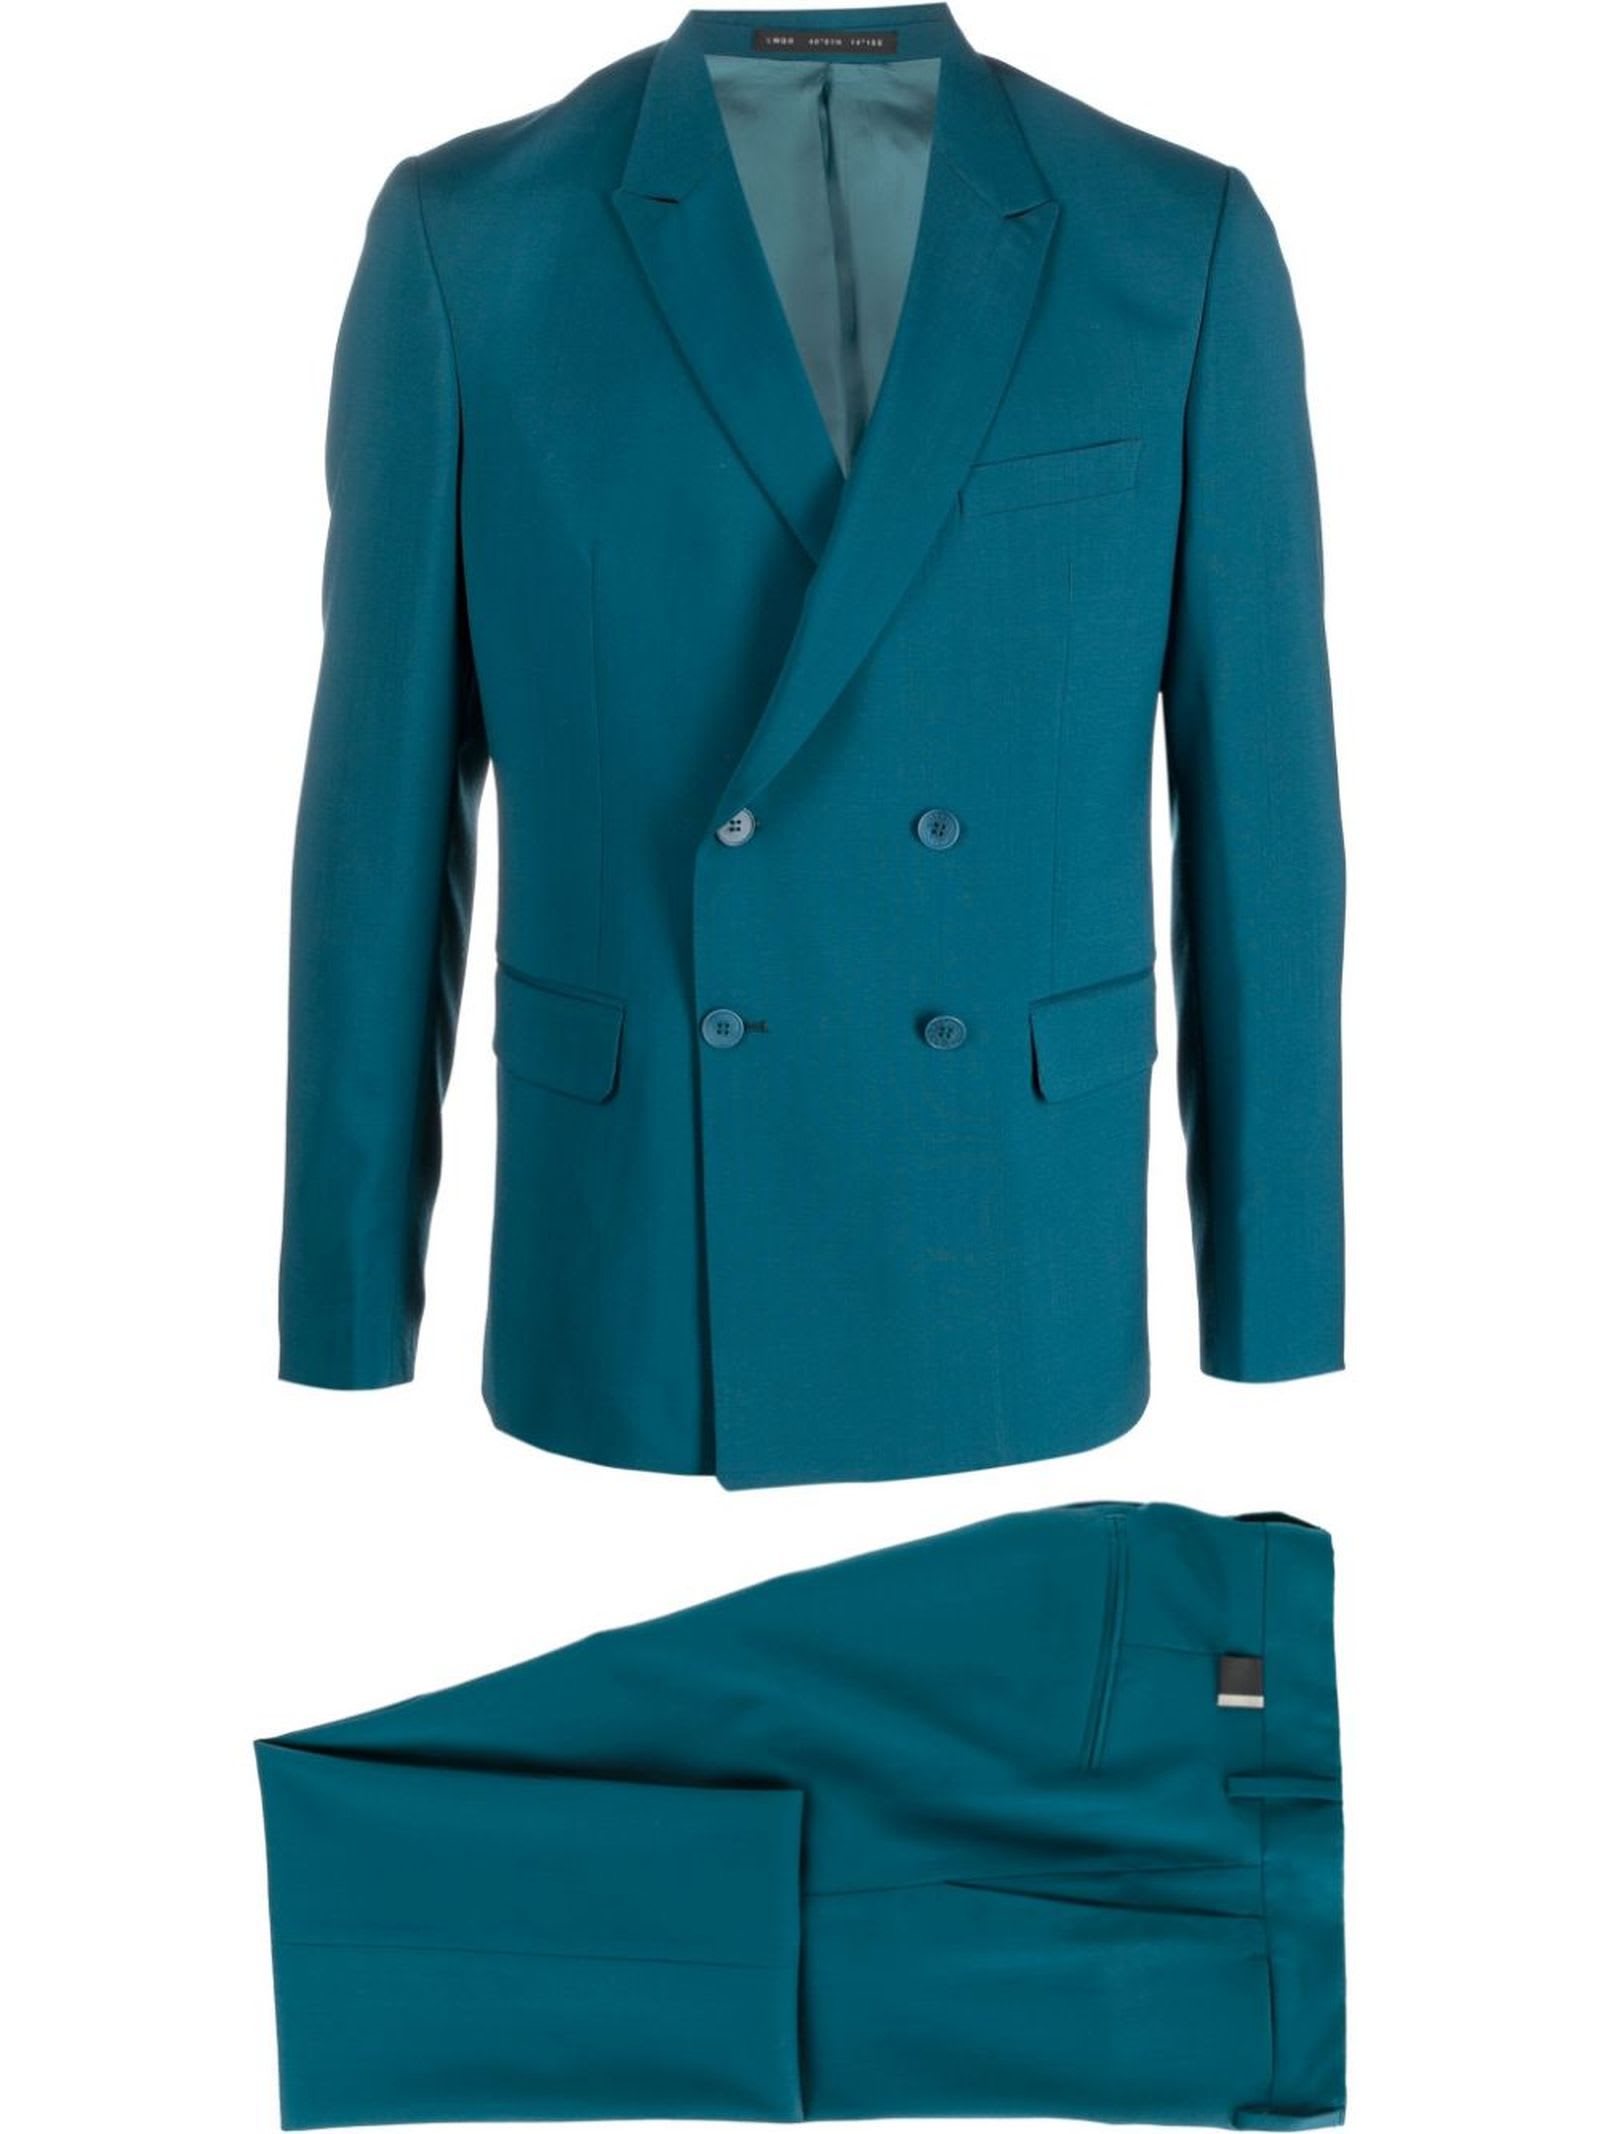 Low Brand Petrol Green Wool Double-breasted Wool Suit